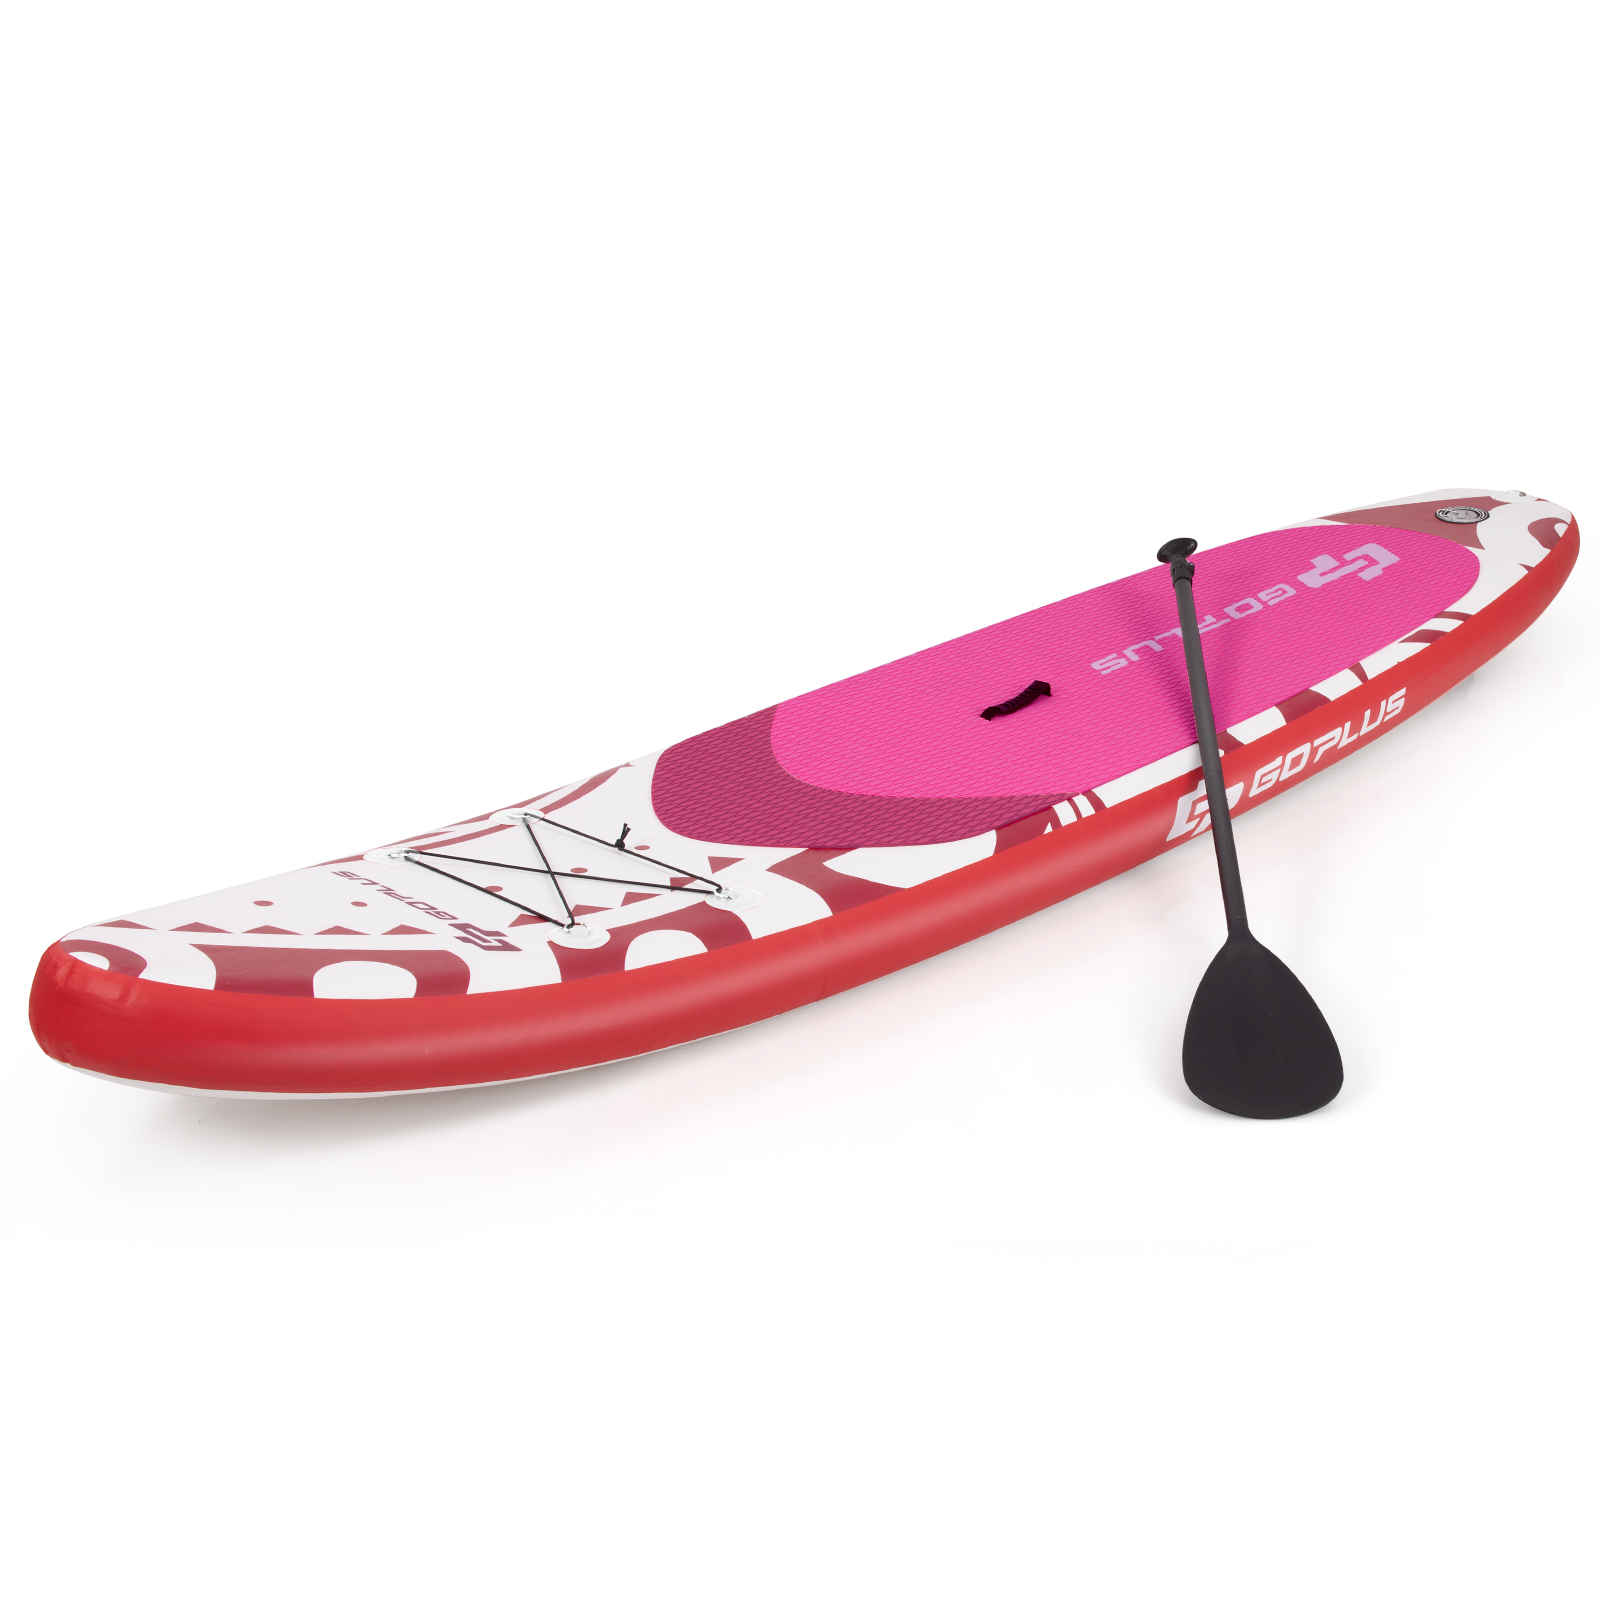 COSTWAY SUP Board Stand Up Paddle, Rosa